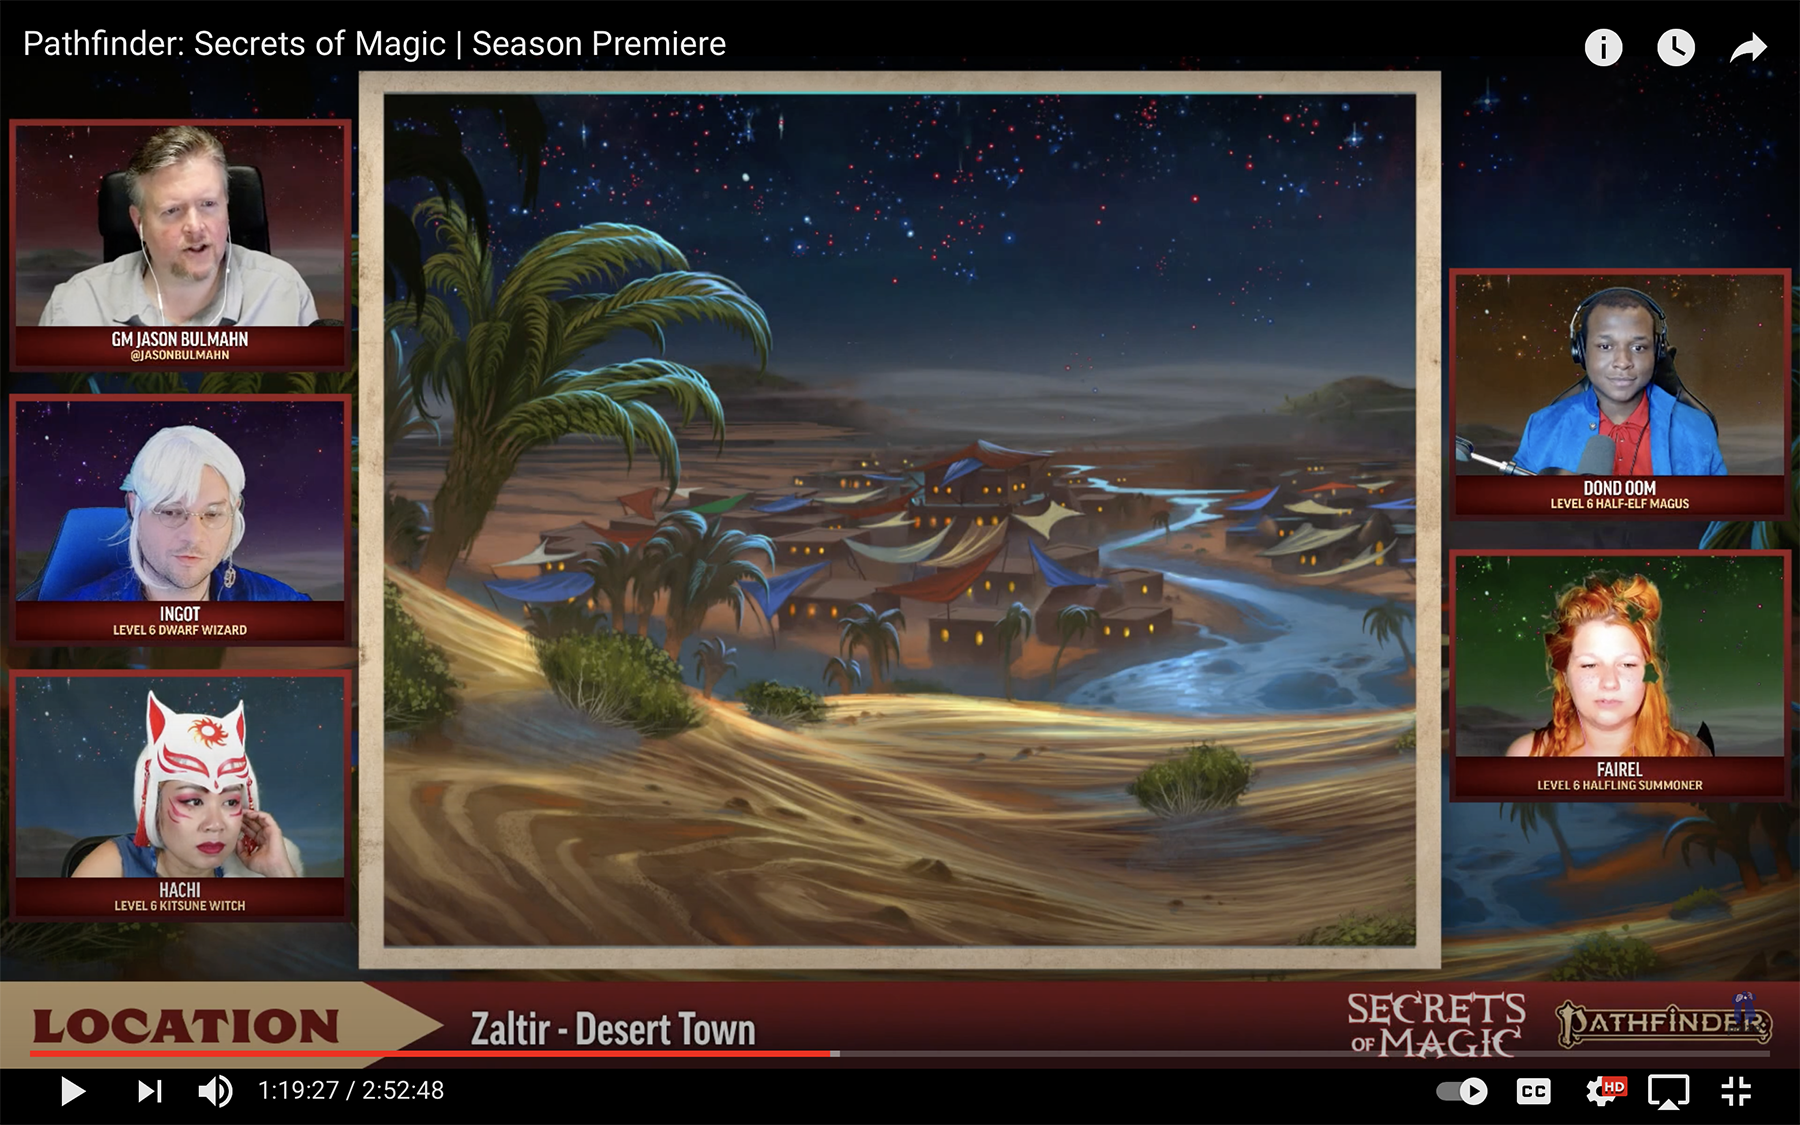 A screenshot of the Pathfinder Secrets of Magic liveplay on twitch. Jason, Xander, and Michelle are on the left side of the screen while London and Bonnie are on the right, with a large image of a desert town in the center